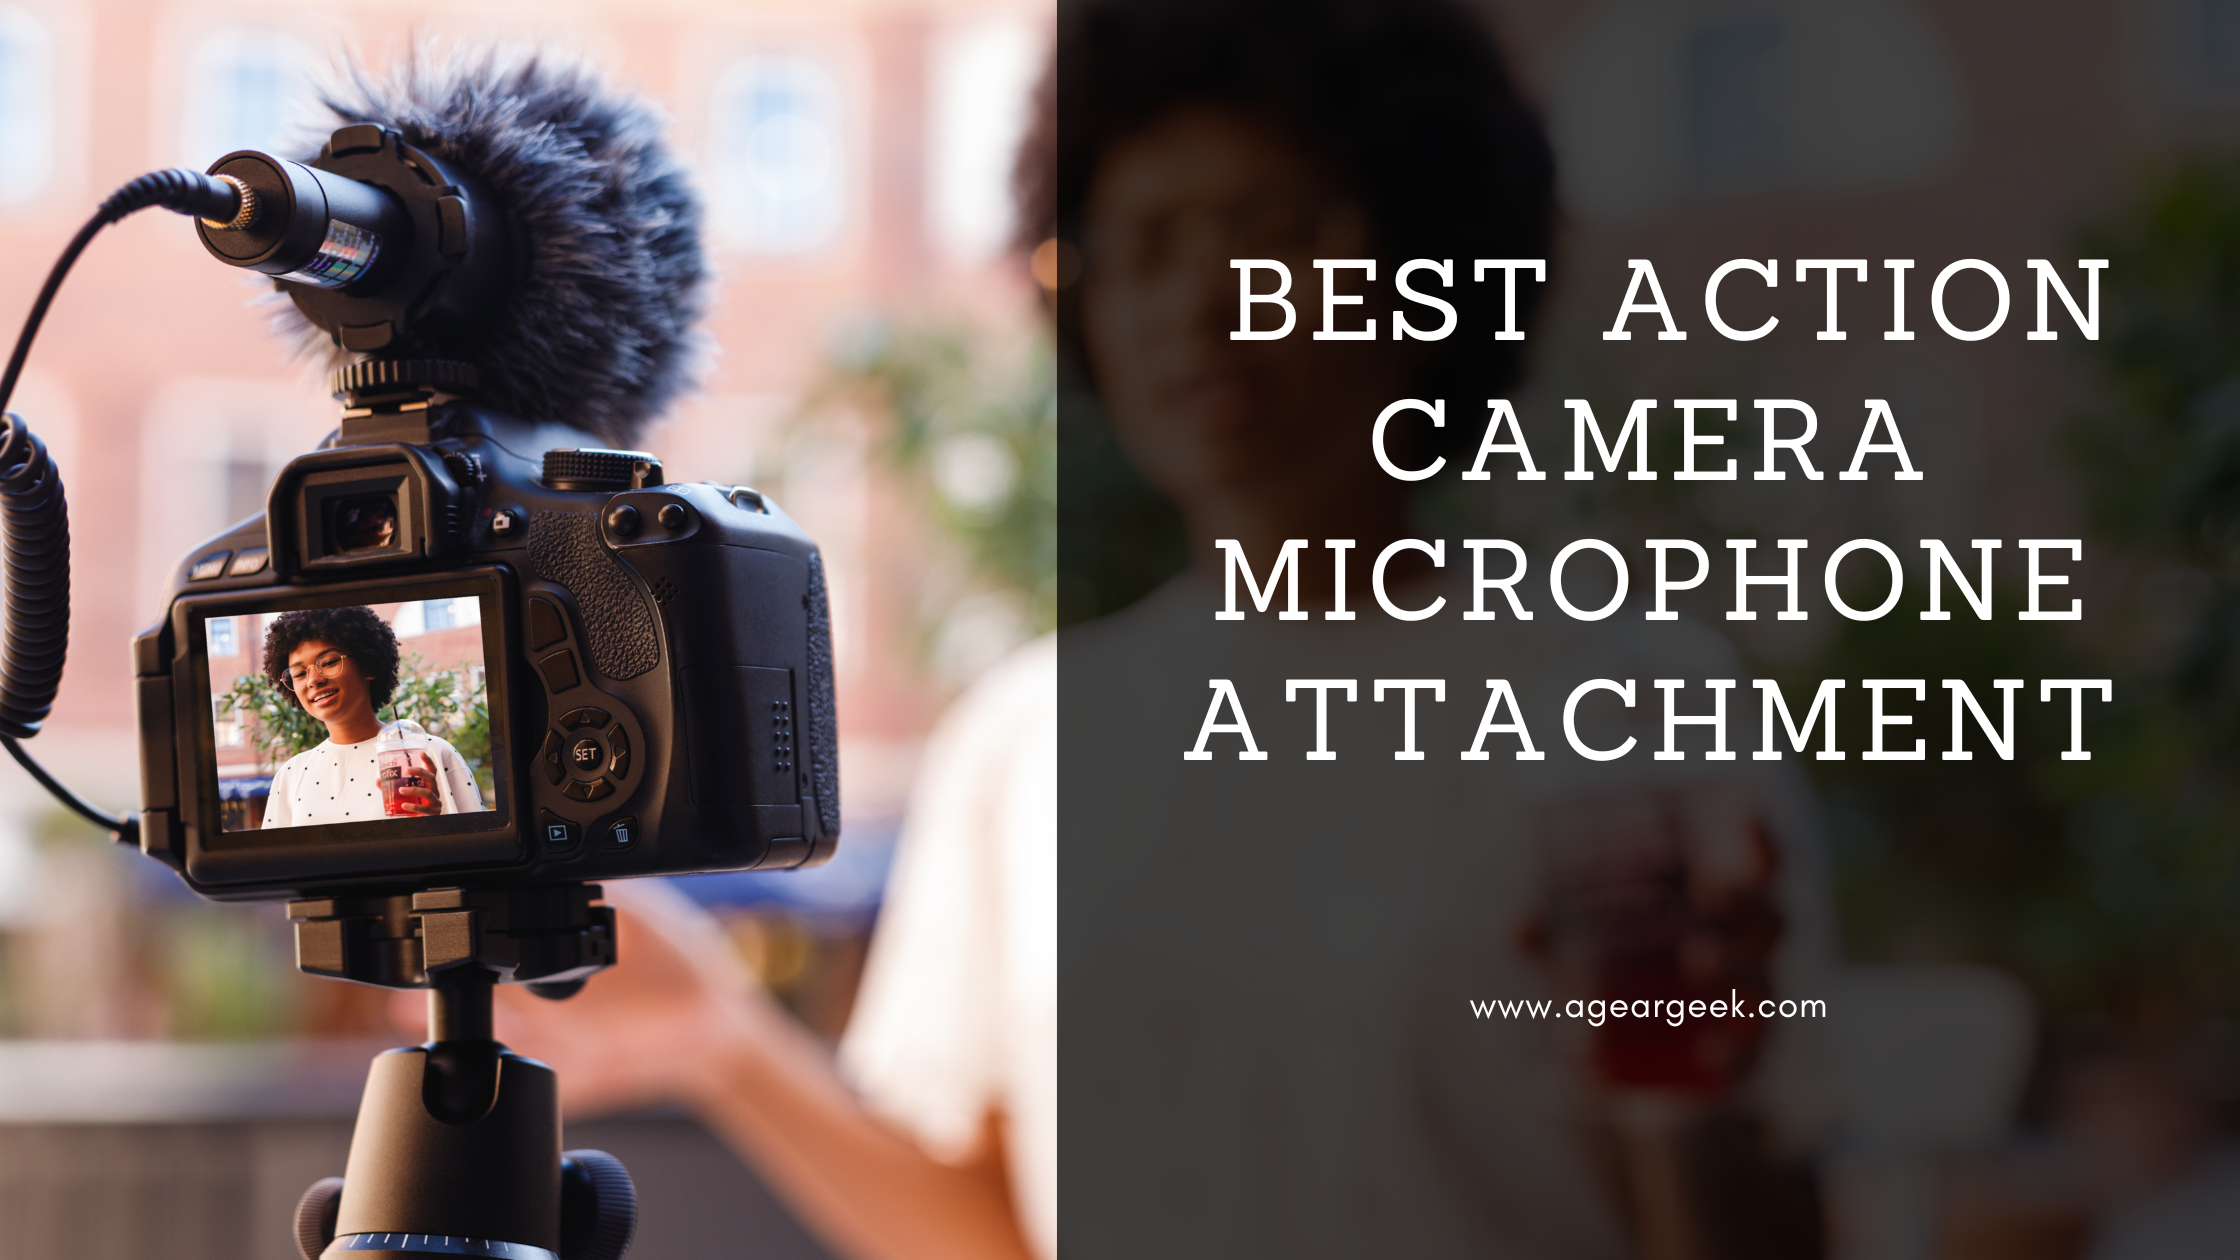 Action camera microphone attachment